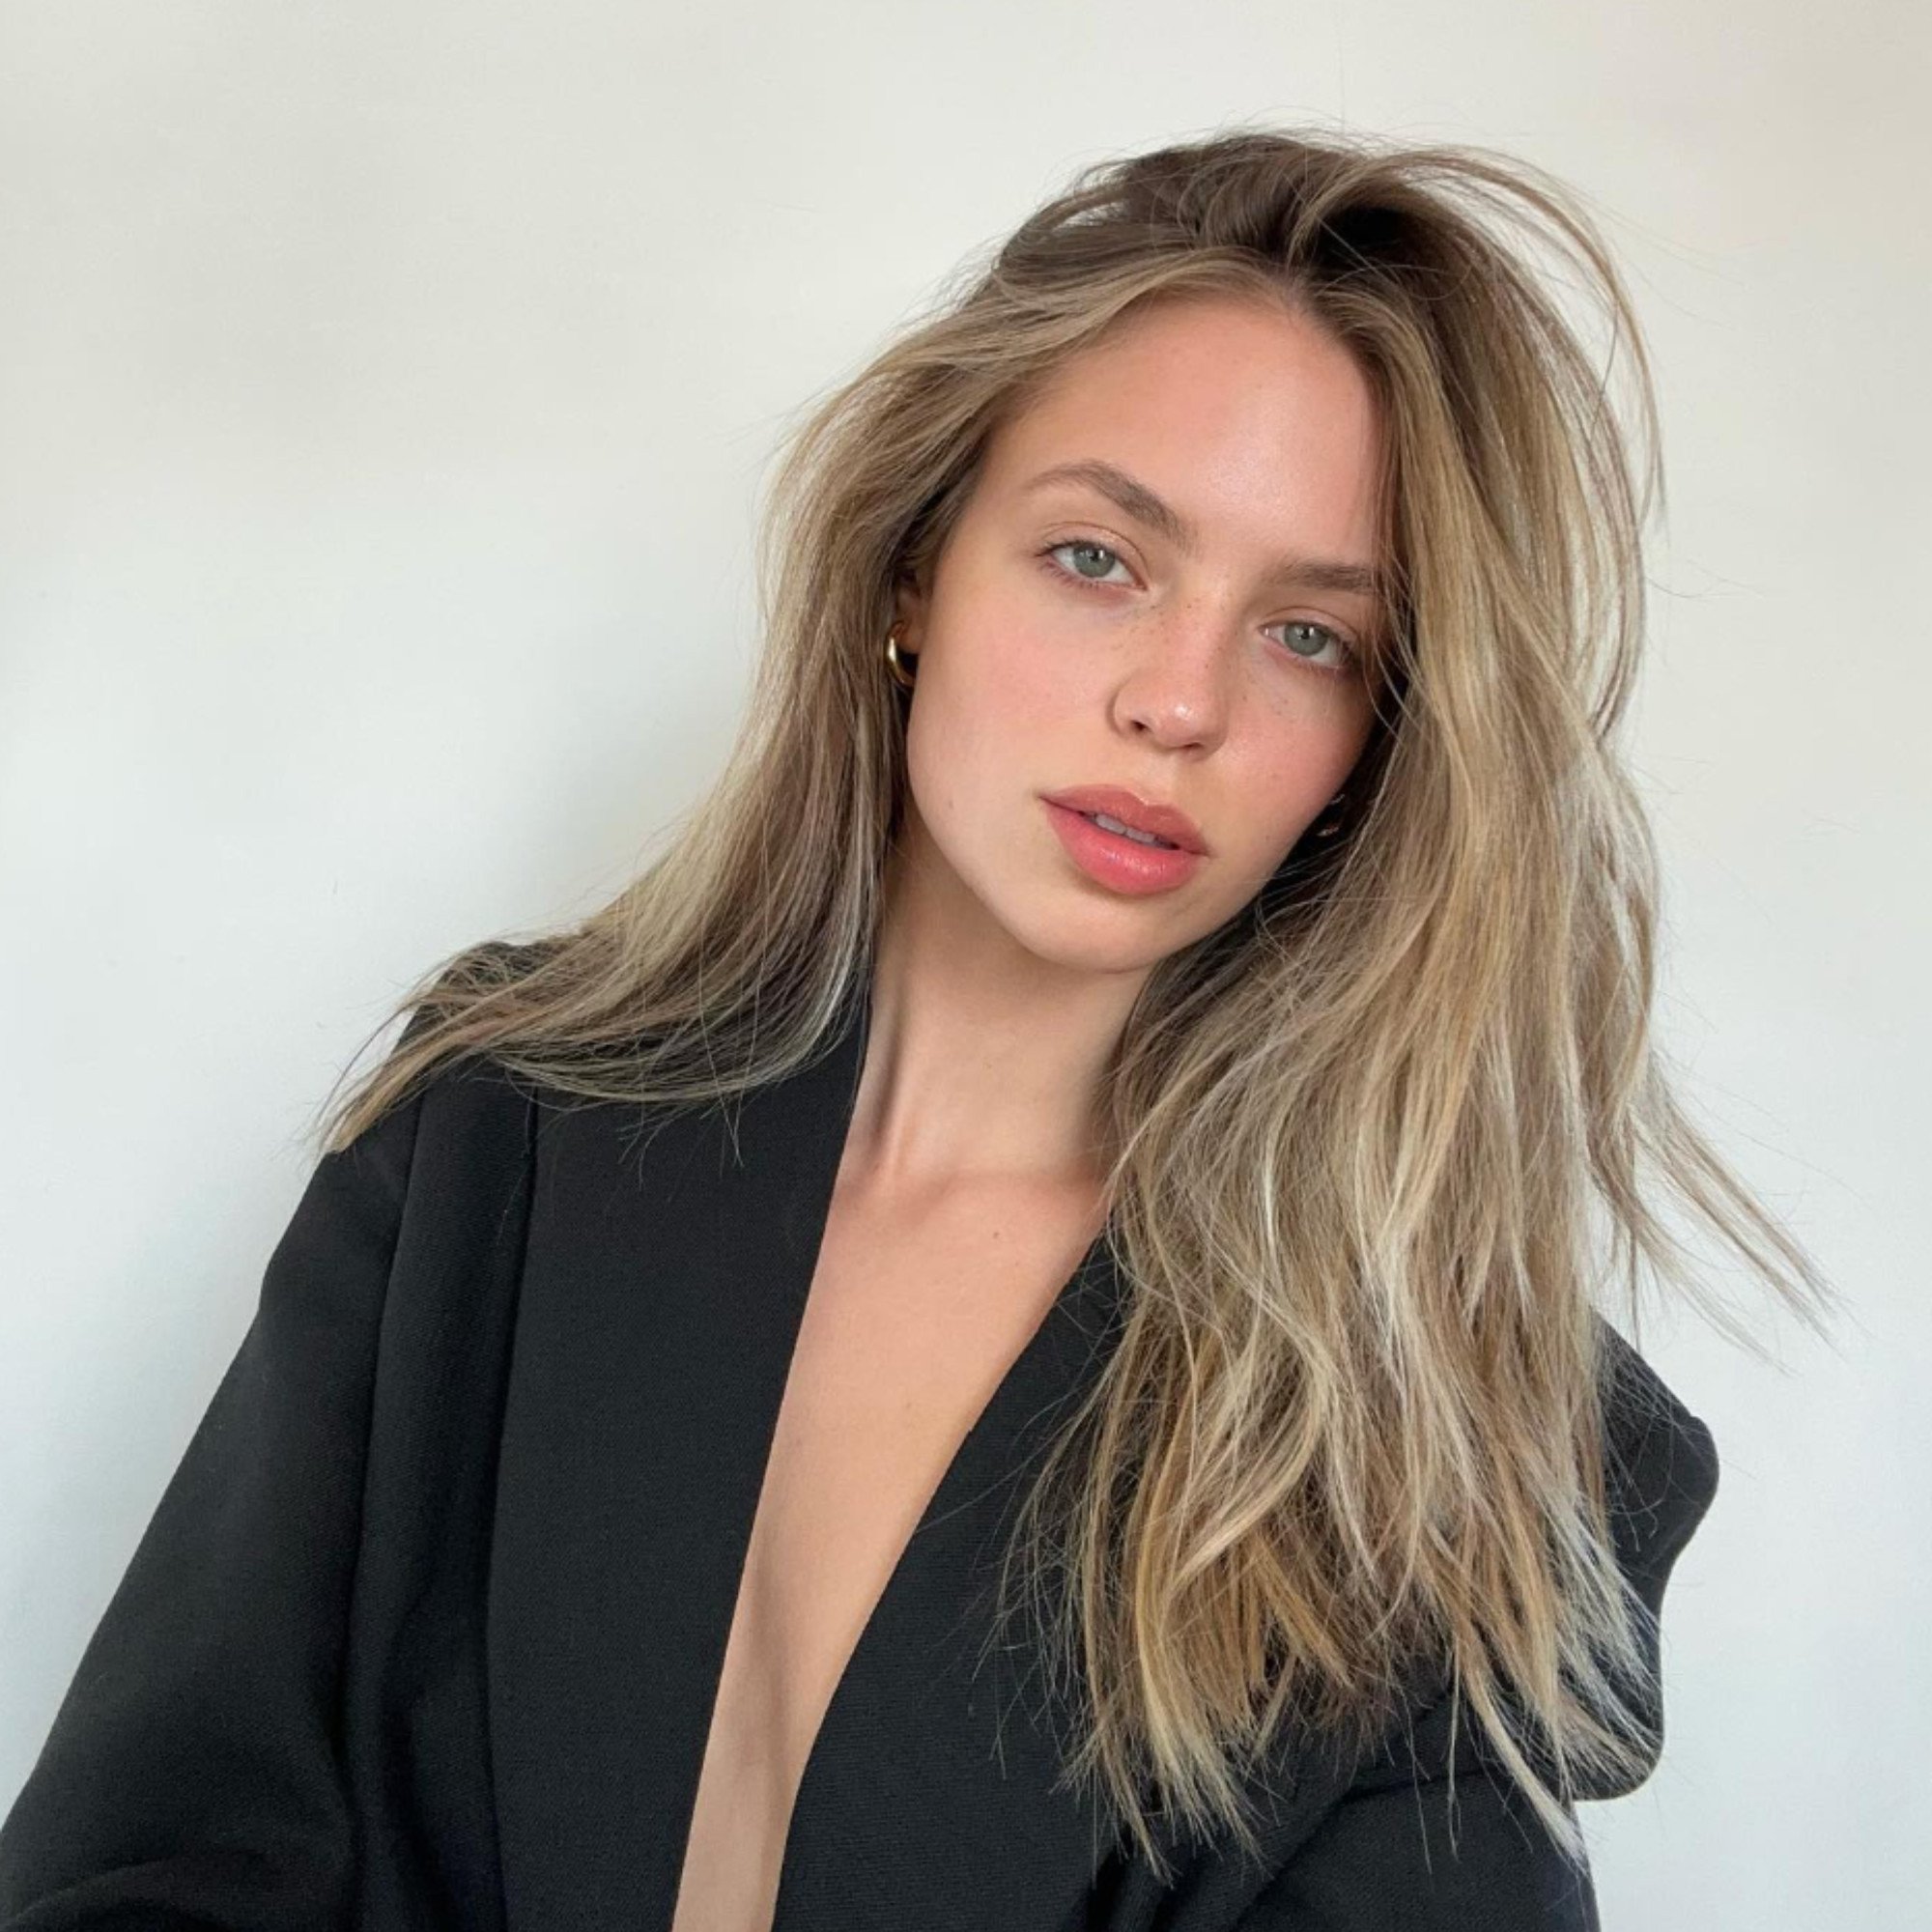 Billie Eilish's to-be sis-in-law? Meet Claudia Sulewski, Finneas' beauty  r girlfriend: Billie's brother met the influencer on a dating app in  2018 – and she just launched her brand Cyklar